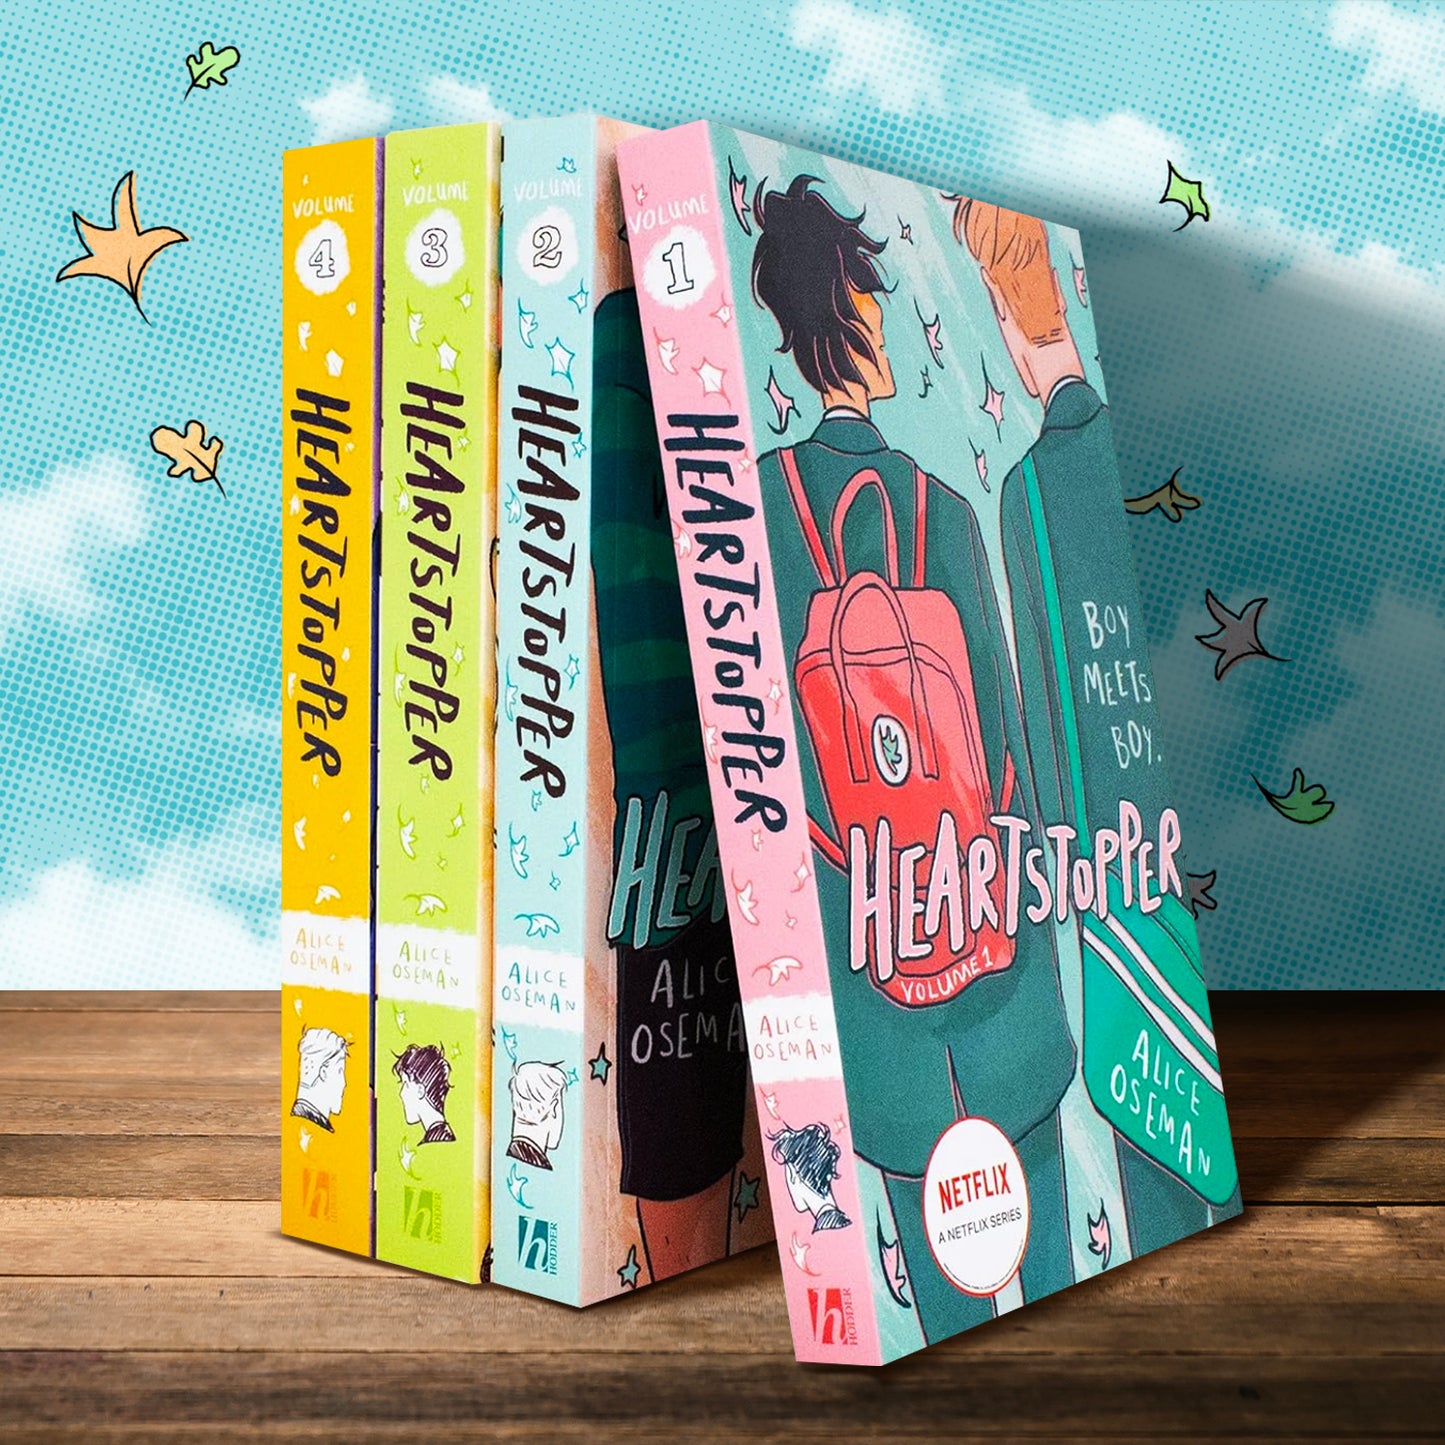 The first 4 volumes of 'Heartstopper', spines out, on a wooden table. The books are in front of a cloudy background illustrated with the classic Heartstopper leaves